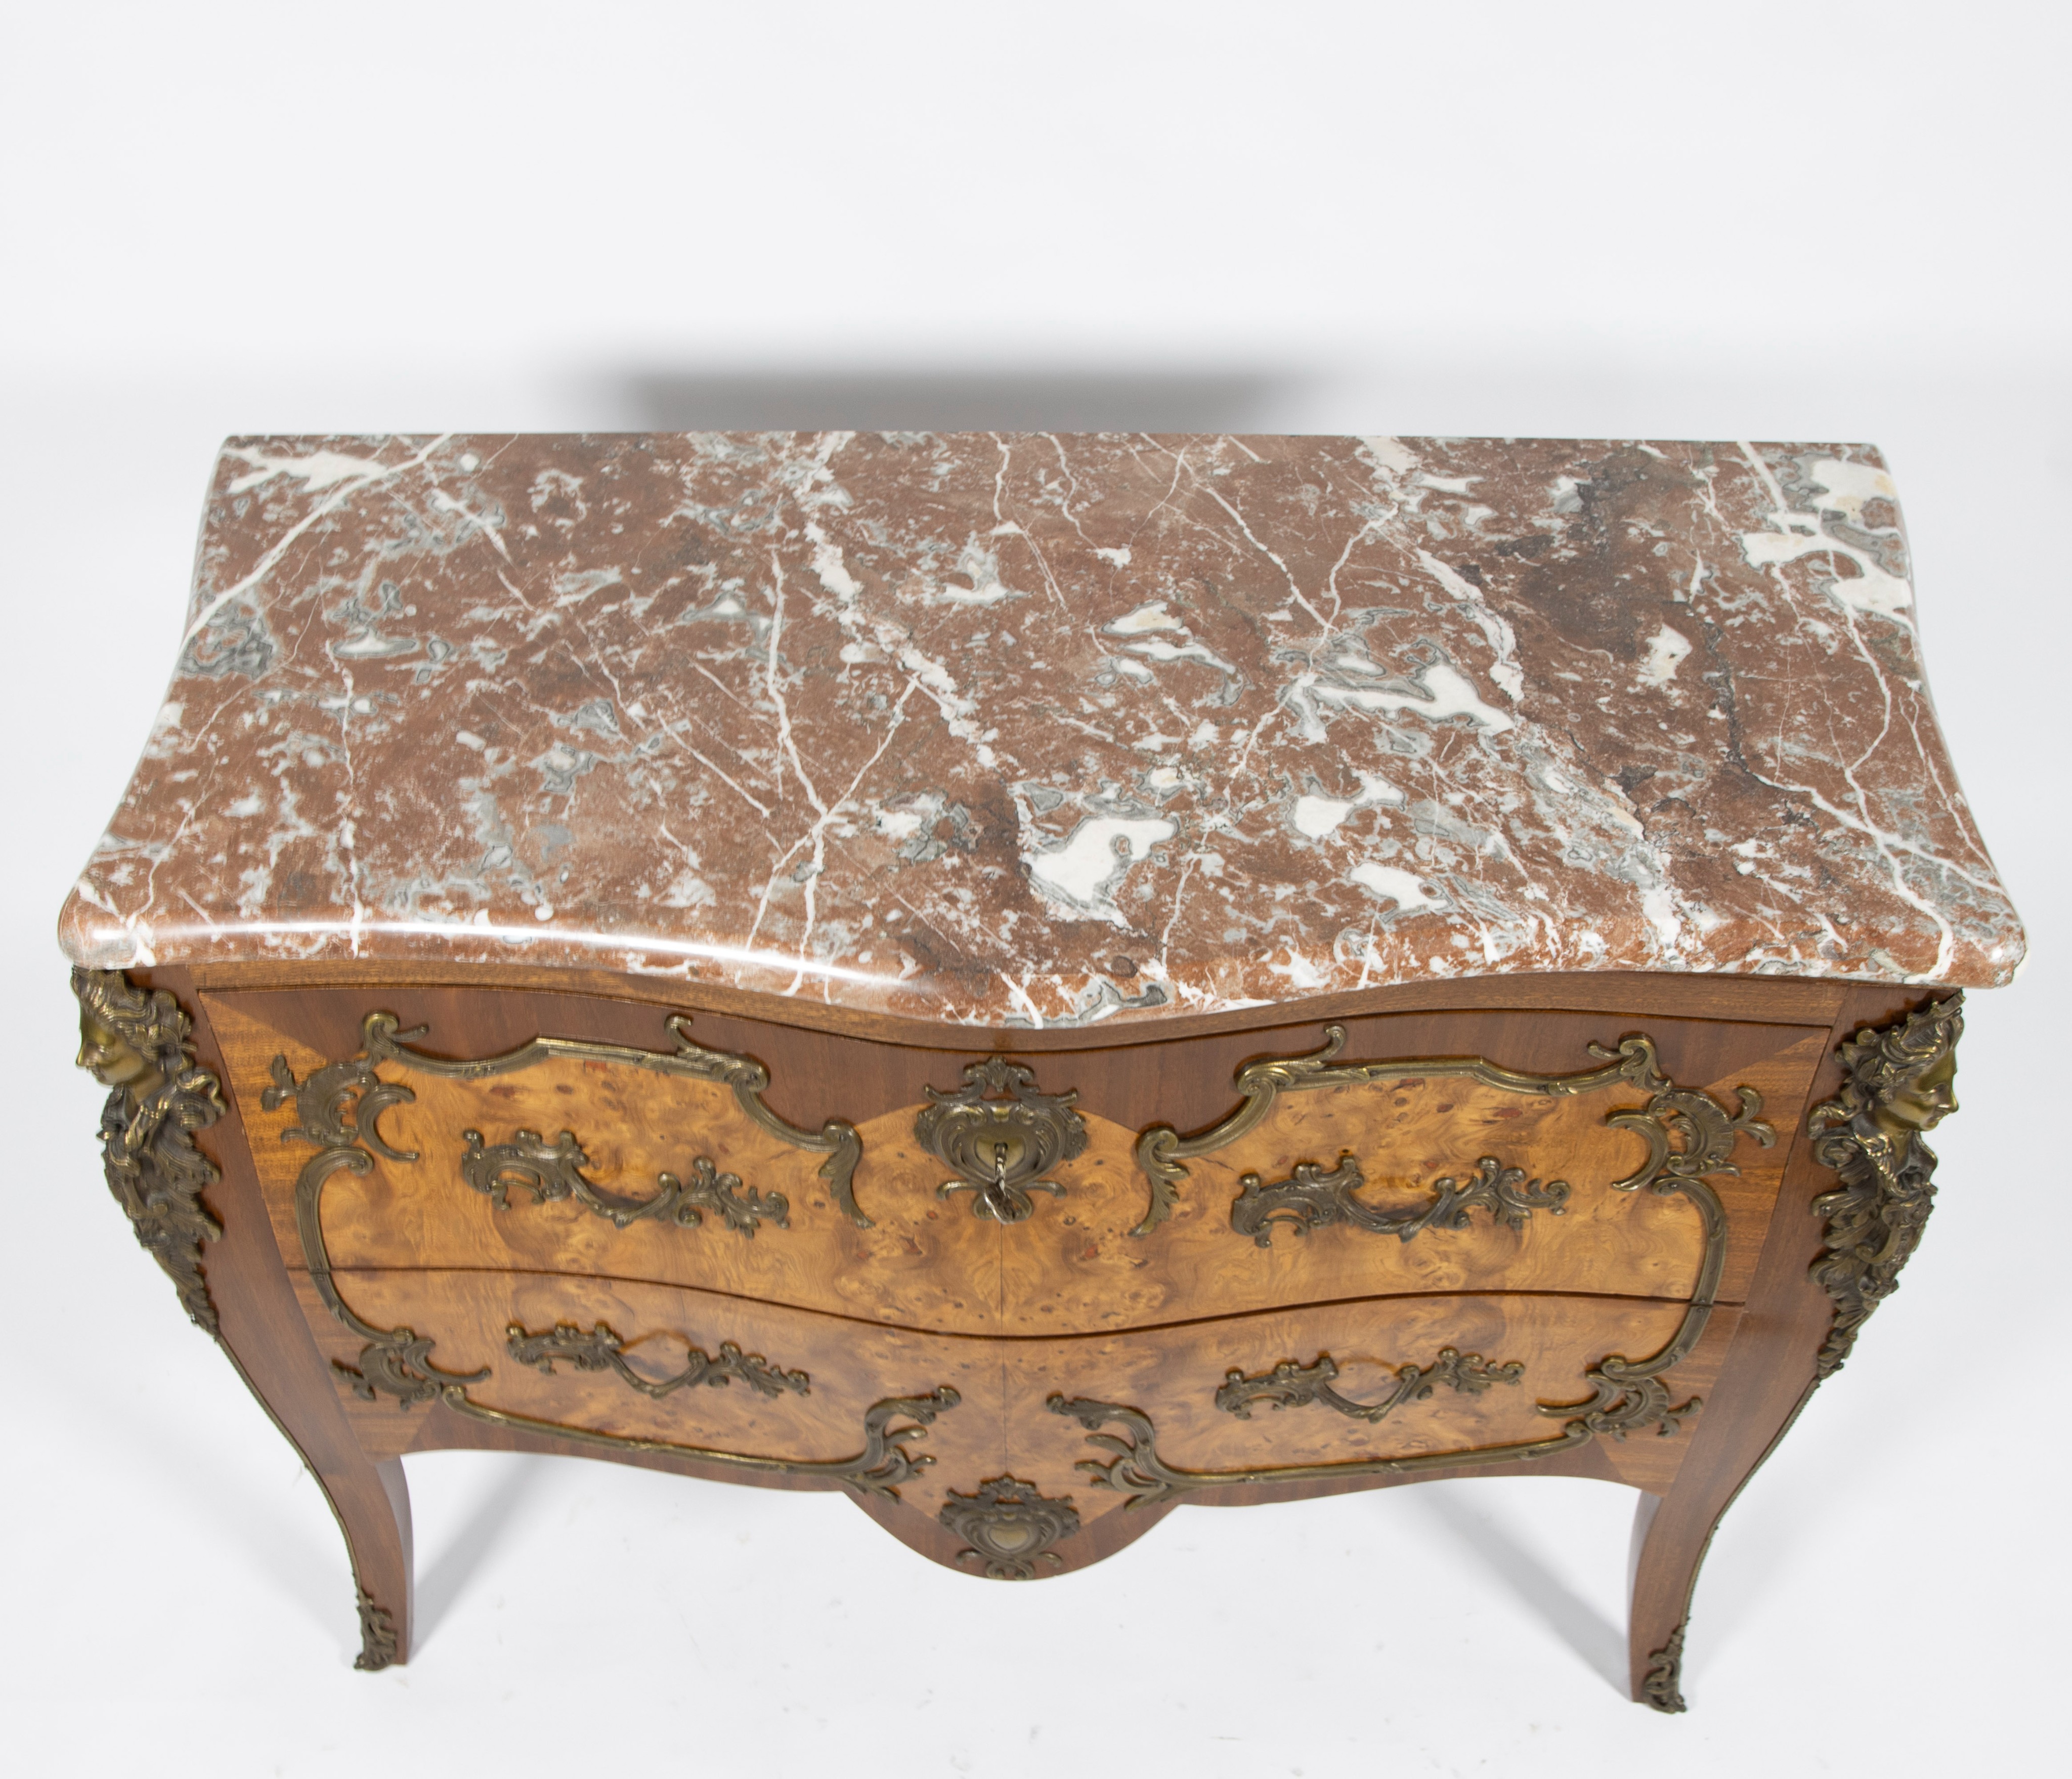 Chest of drawers style Louis XV with bronze ornaments and marble top - Image 2 of 4